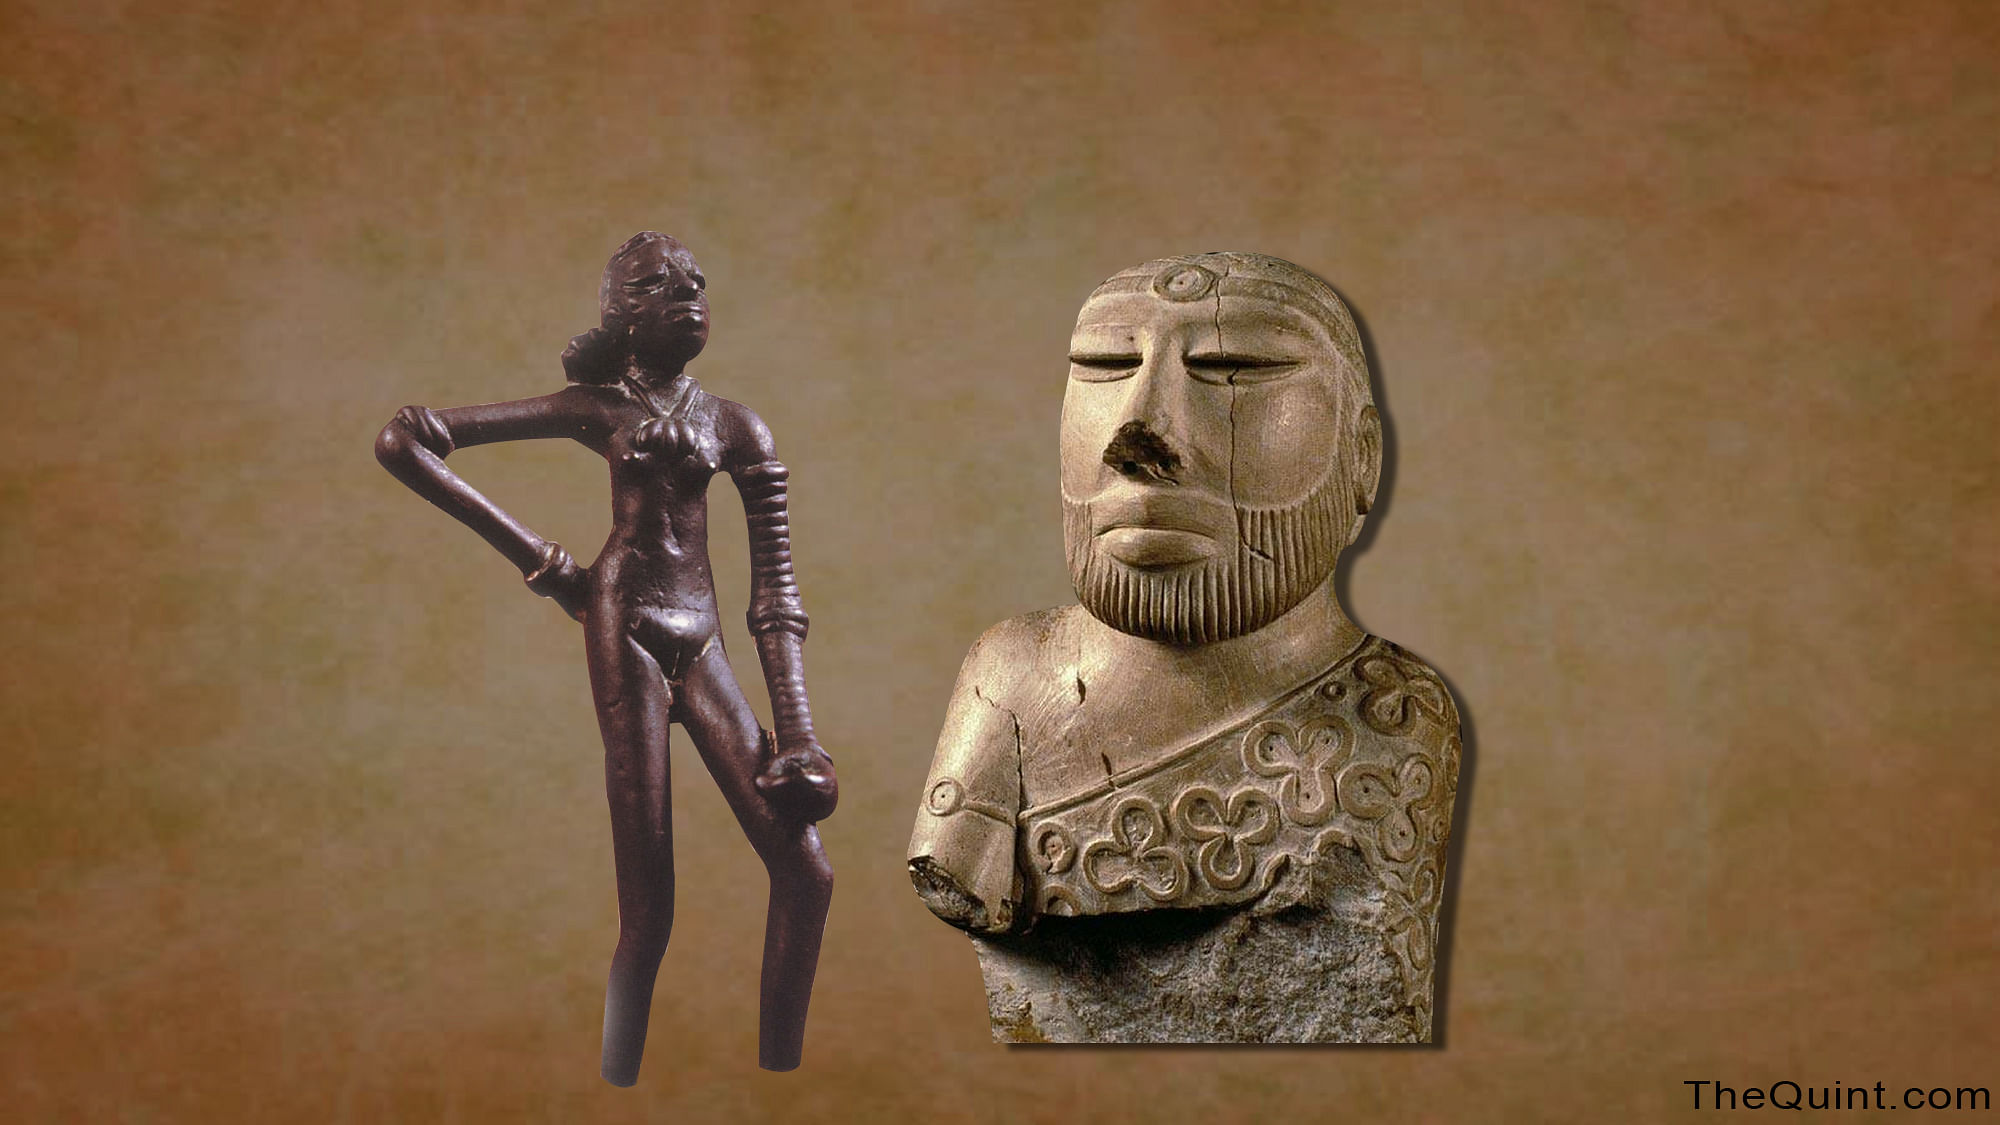 The Dancing Girl (left) and the Priest King are synonymous with the Harappan Civilisation. 